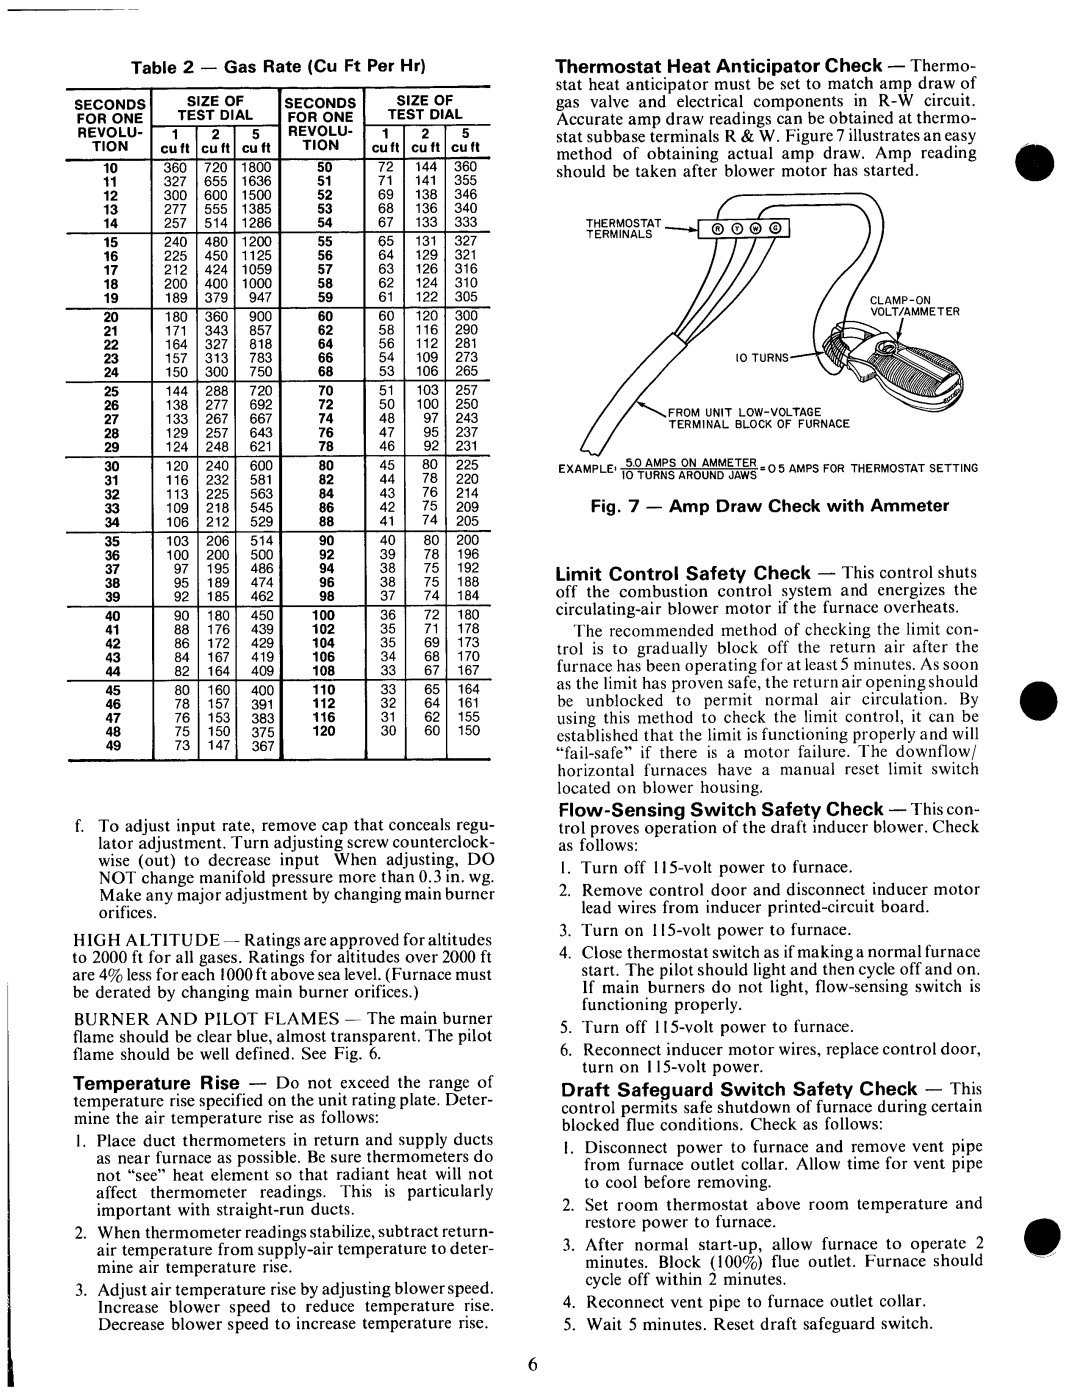 Carrier 58SS/DH manual 